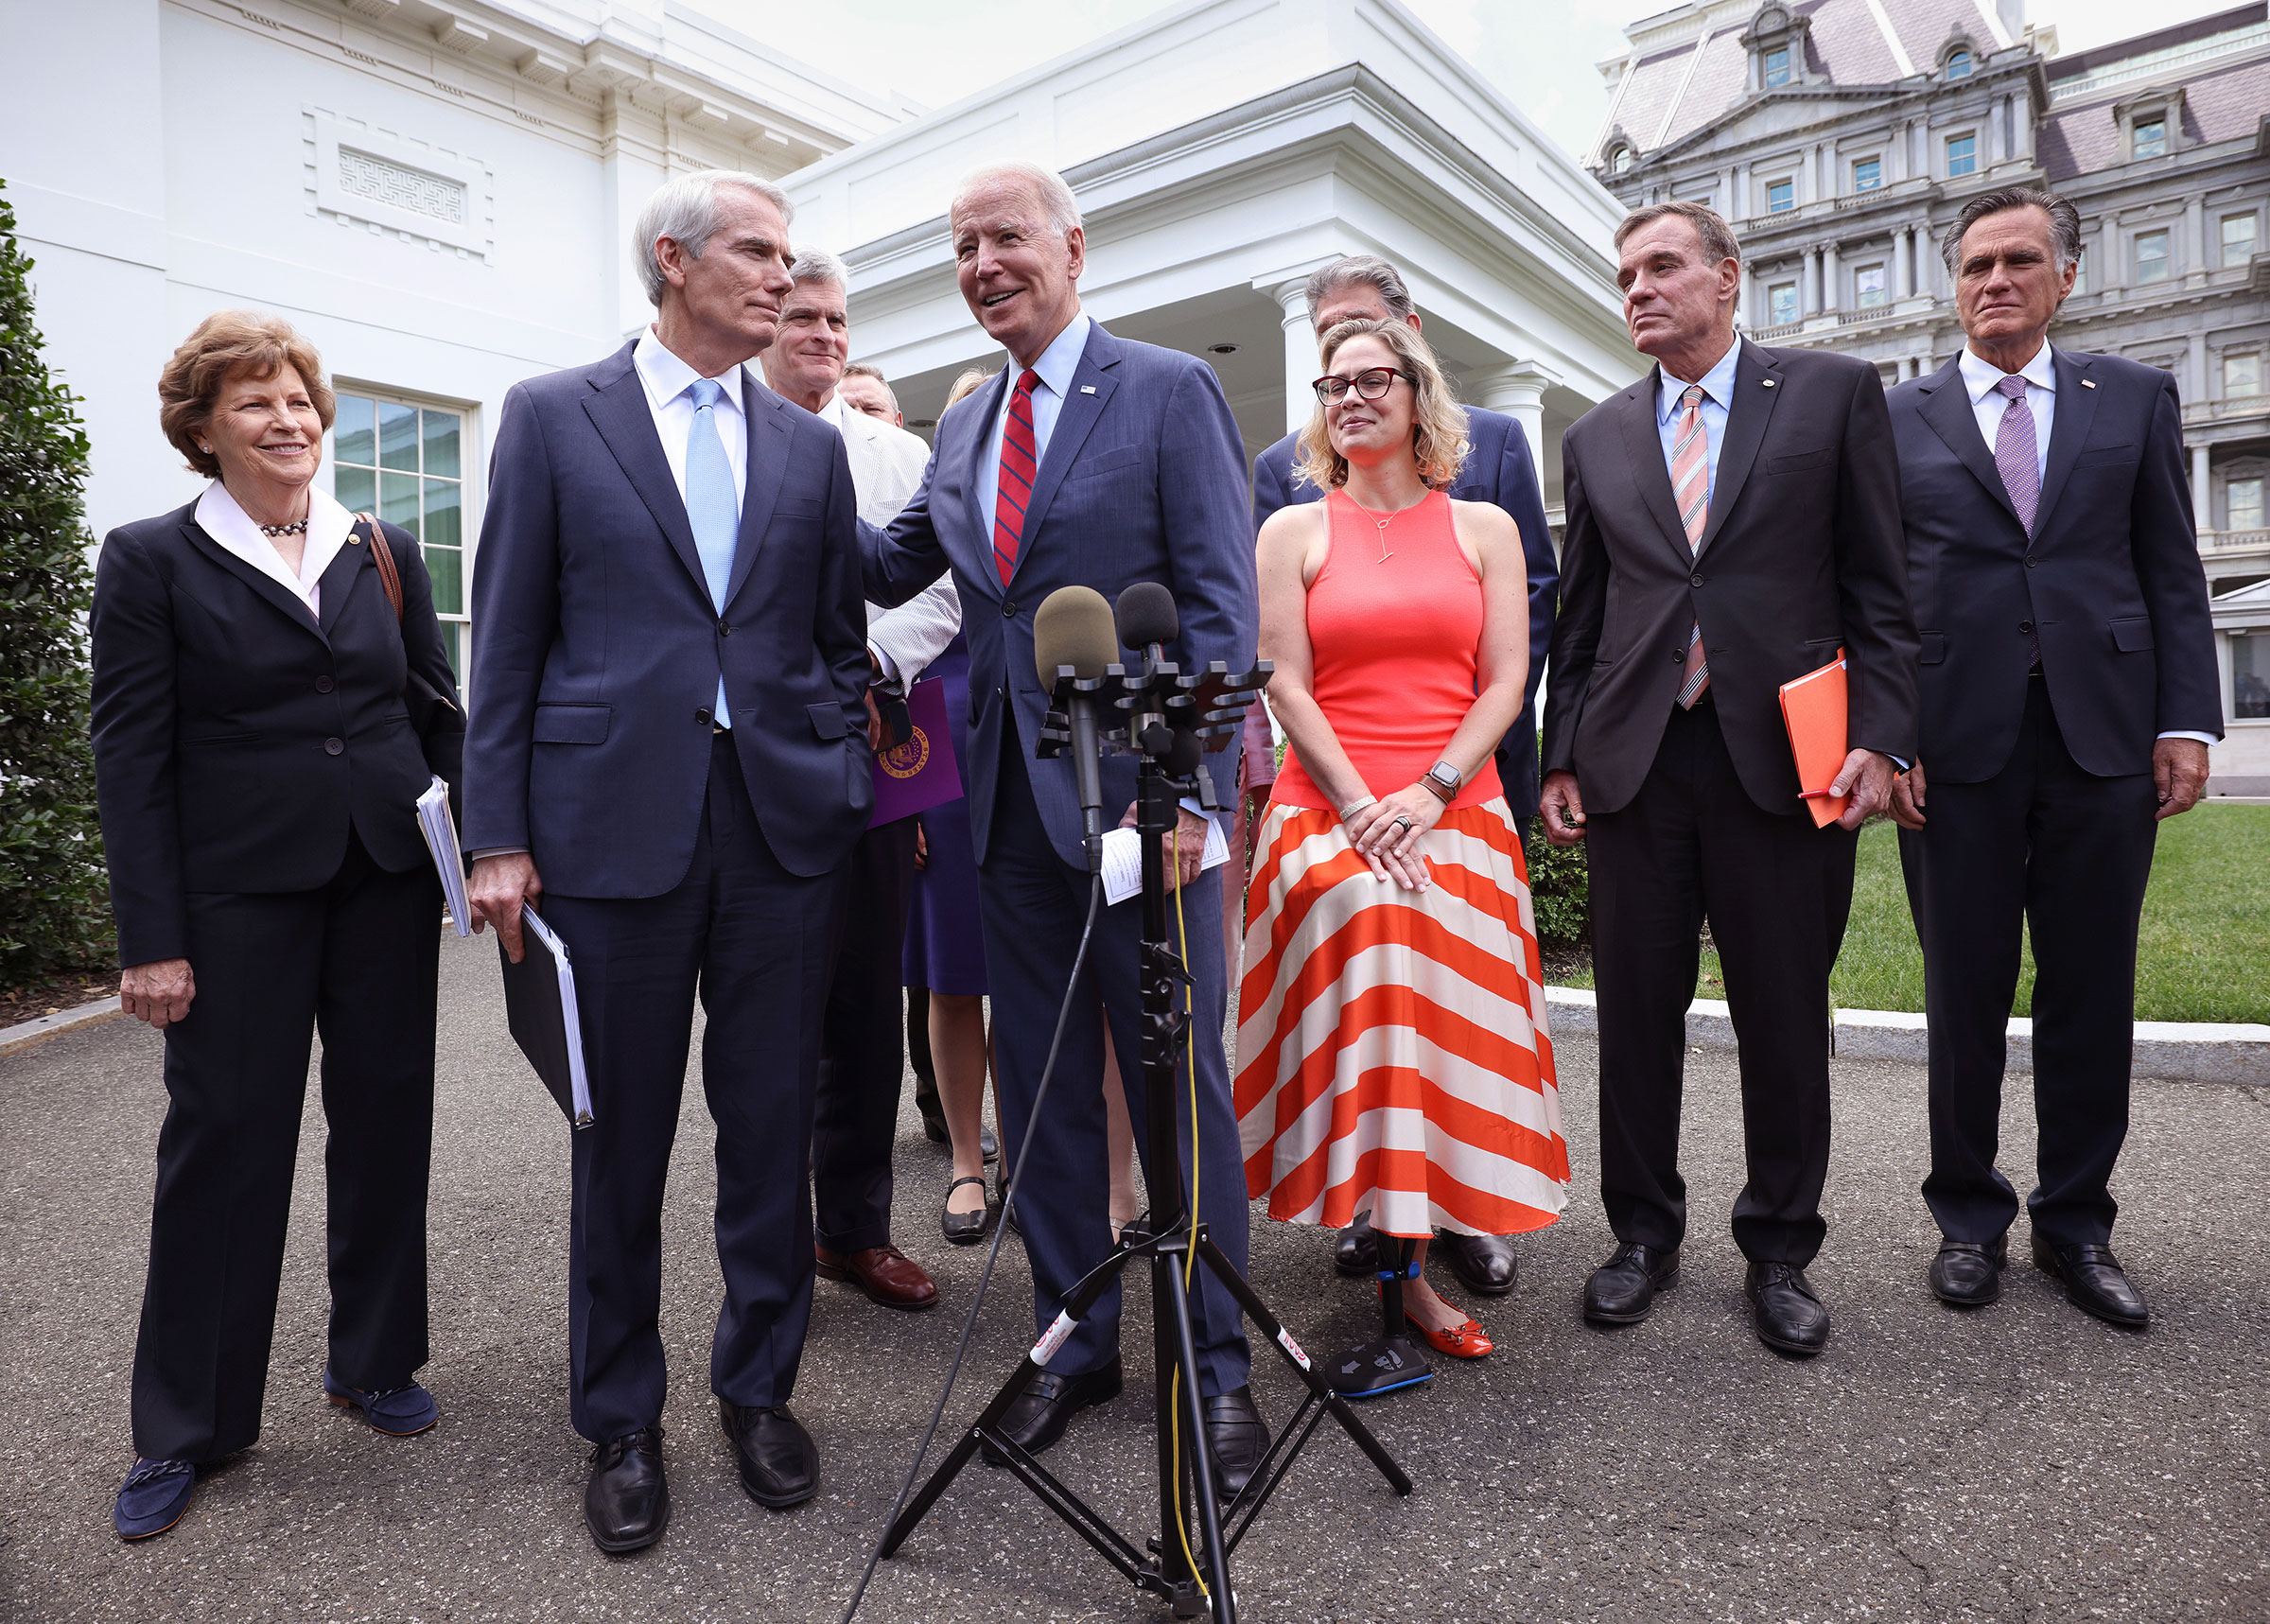 President Joe Biden (C), joined by from left to right, Sen Jeanne Shaheen (D-NH), Sen. Rob Portman (R-OH), Sen Bill Cassidy (R-LA), Sen. Kyrsten Sinema (D-AZ), Sen. Mark Warner (D-VA) and Sen Mitt Romney (R-UT), speaks after the bipartisan group of Senators reached a deal on an infrastructure package at the White House on June 24, 2021 in Washington, DC. Biden said both sides made compromises on the nearly $1 trillion infrastructure bill. (Photography by Kevin Dietsch—Getty Images)